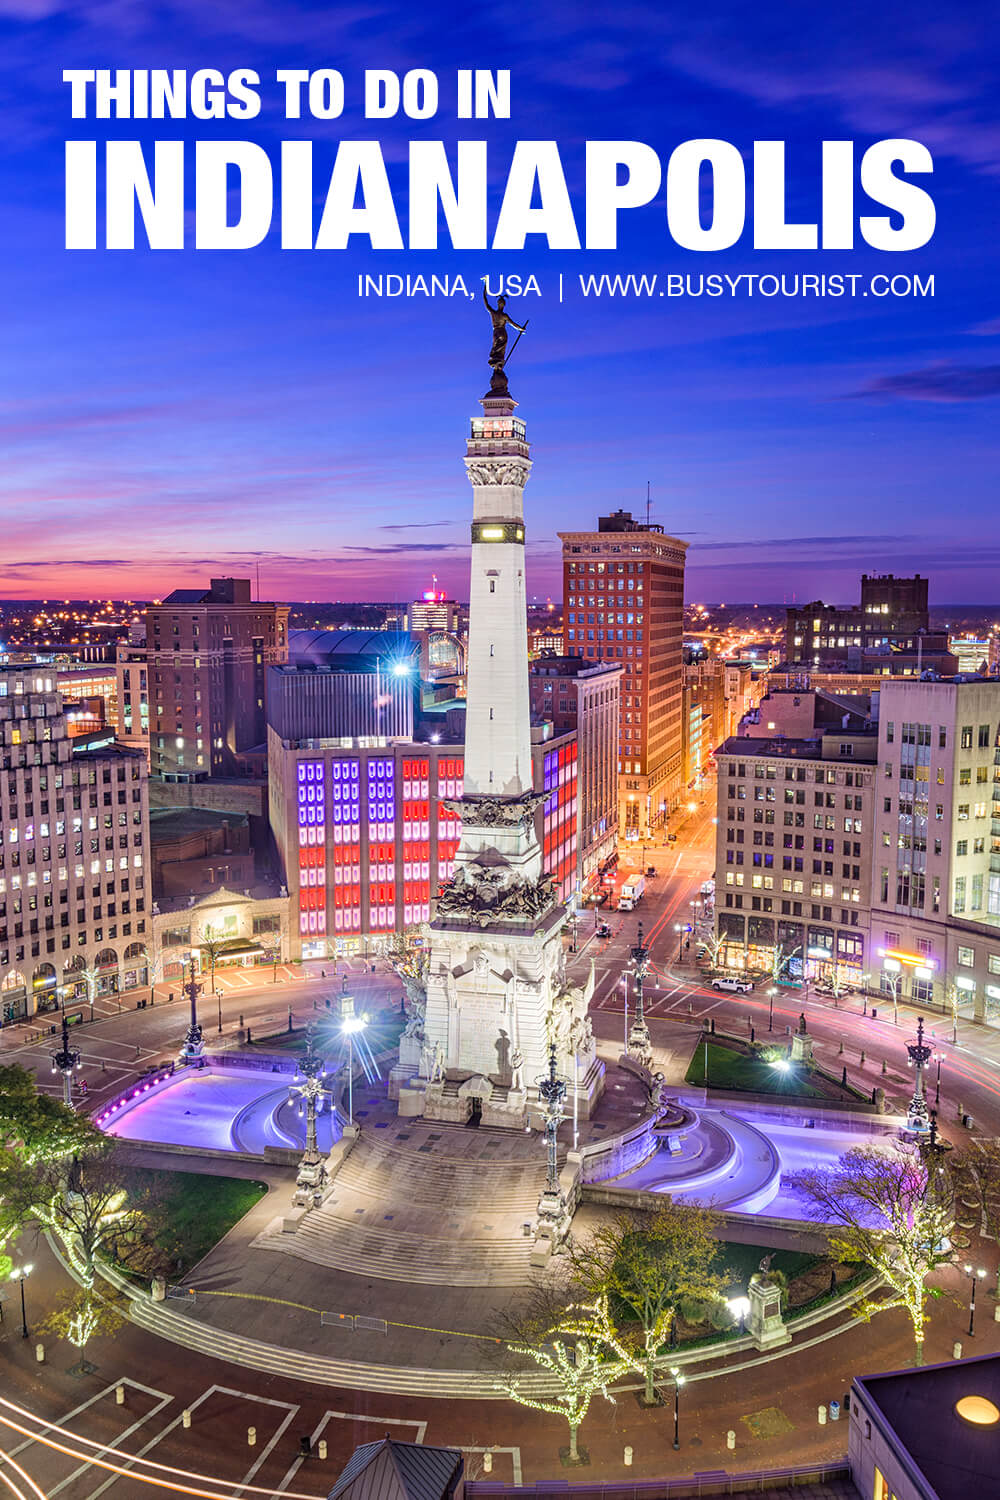 places to visit in indiana indianapolis